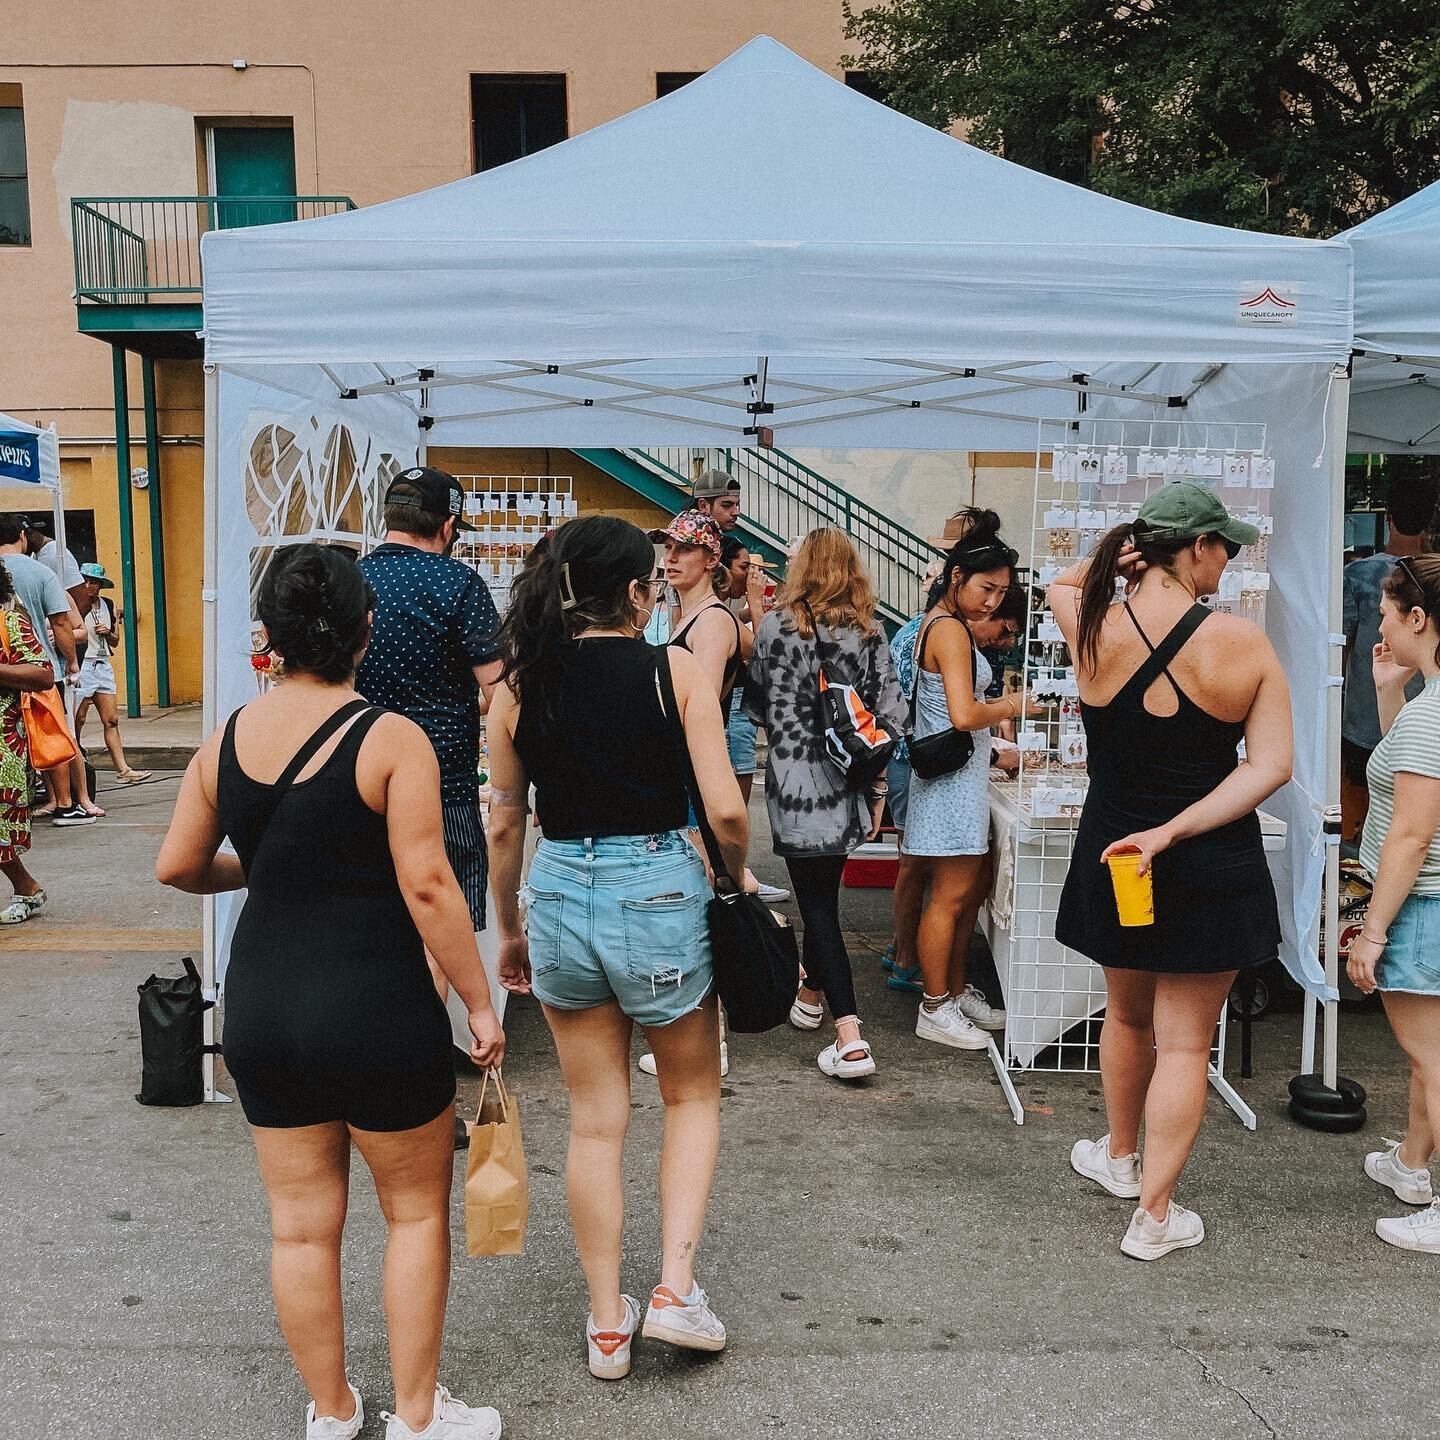 Greetings from Austin! 🙋🏻&zwj;♀️❤️
We're currently at the Pecan Street Festival, which runs from 11am to 10pm today, and from 11am to 8pm tomorrow. If you're in the area, we highly recommend stopping by to enjoy some amazing food, live music, and s